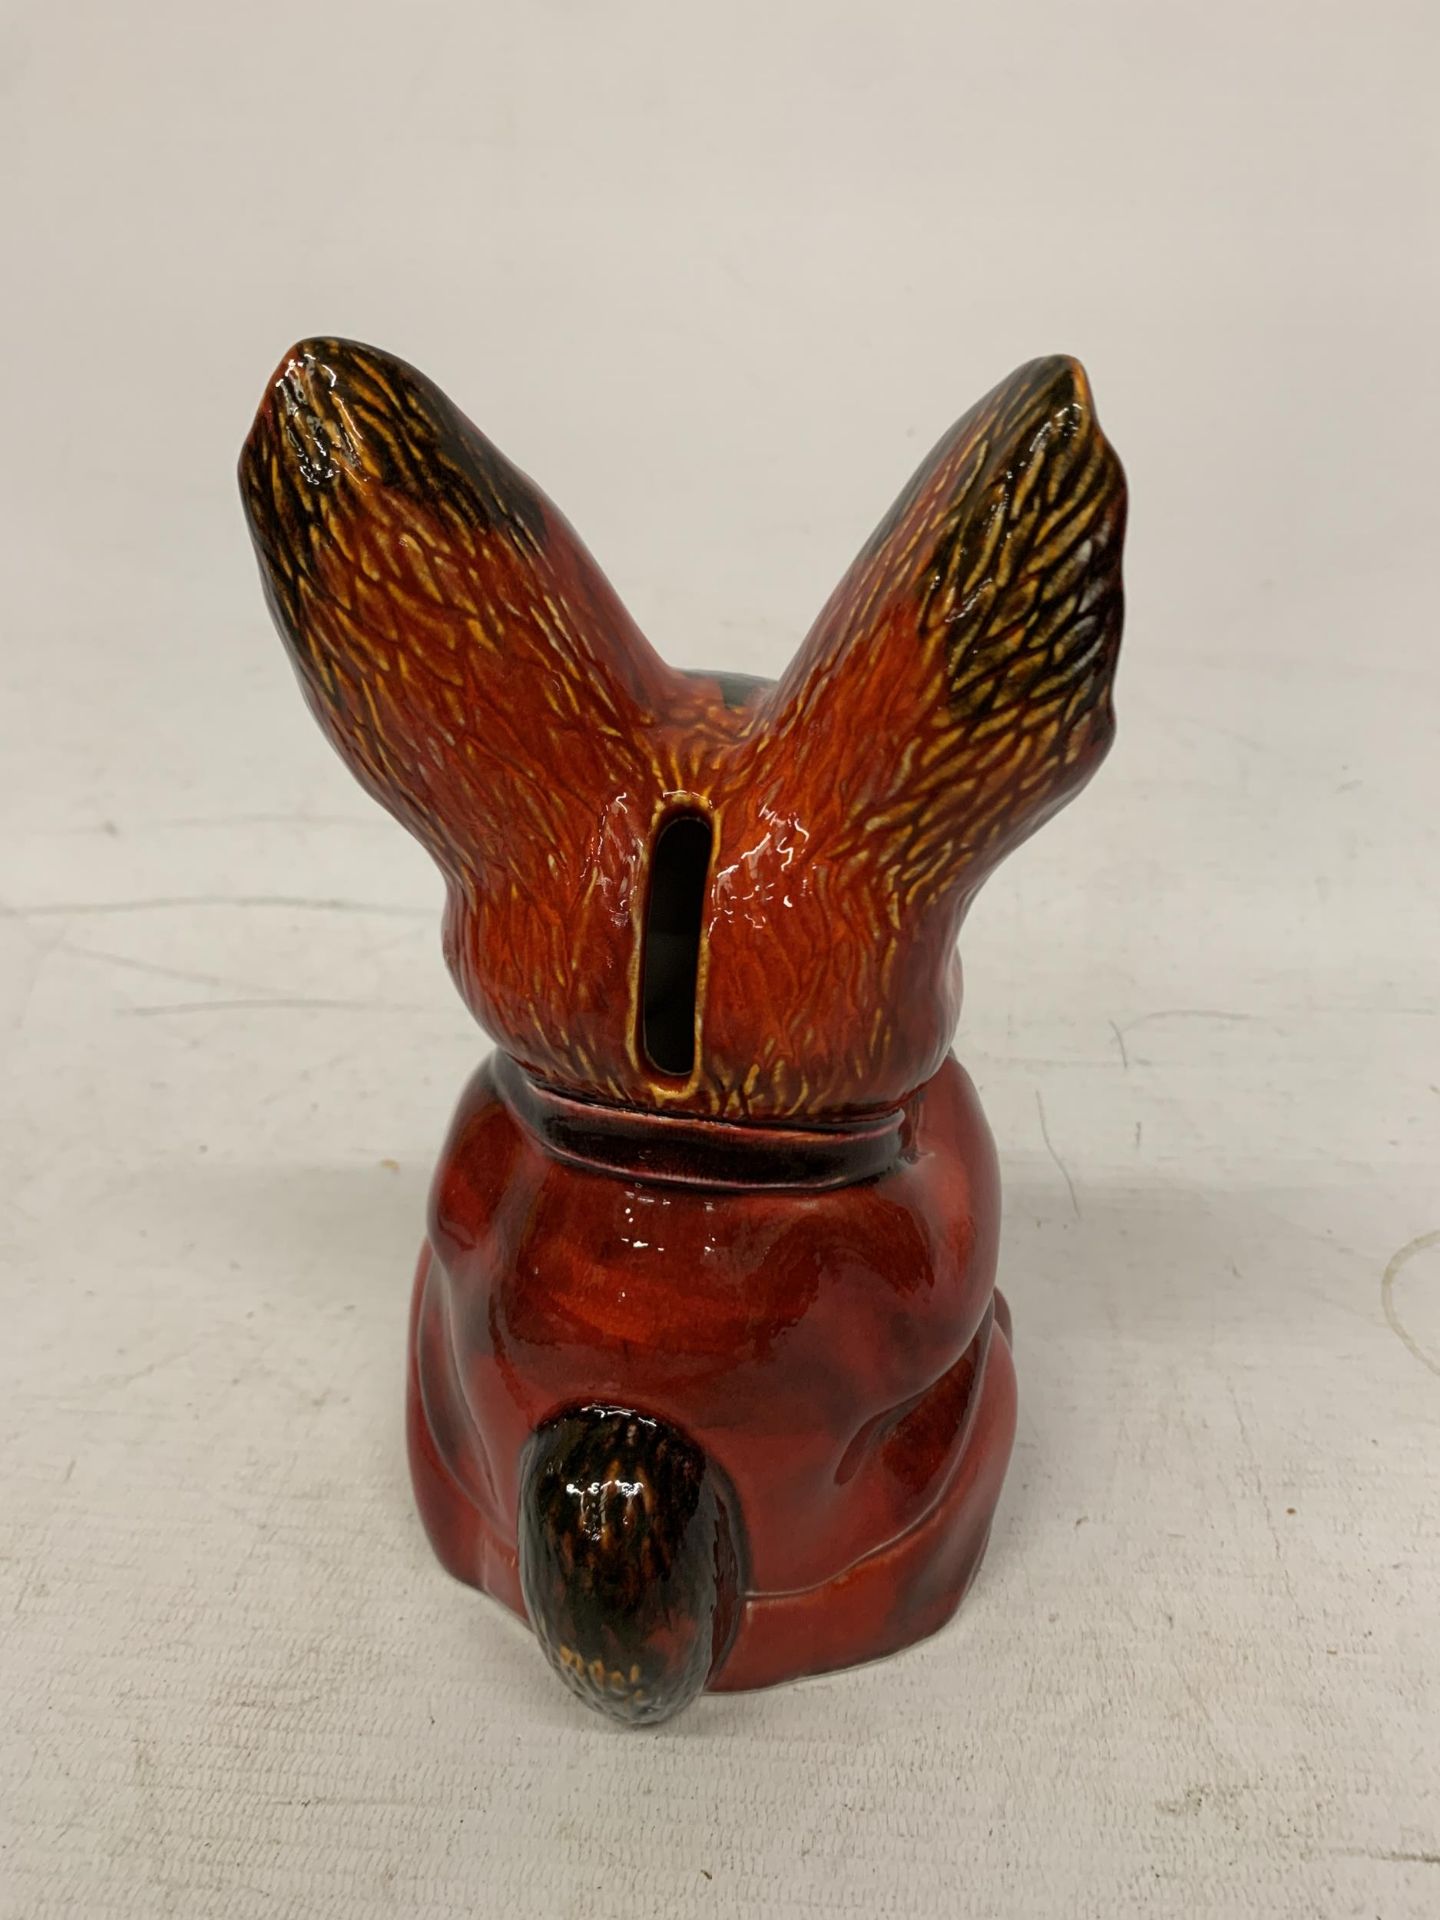 AN ANITA HARRIS HAND PAINTED AND SIGNED IN GOLD RABBIT MONEY BOX - Image 3 of 5